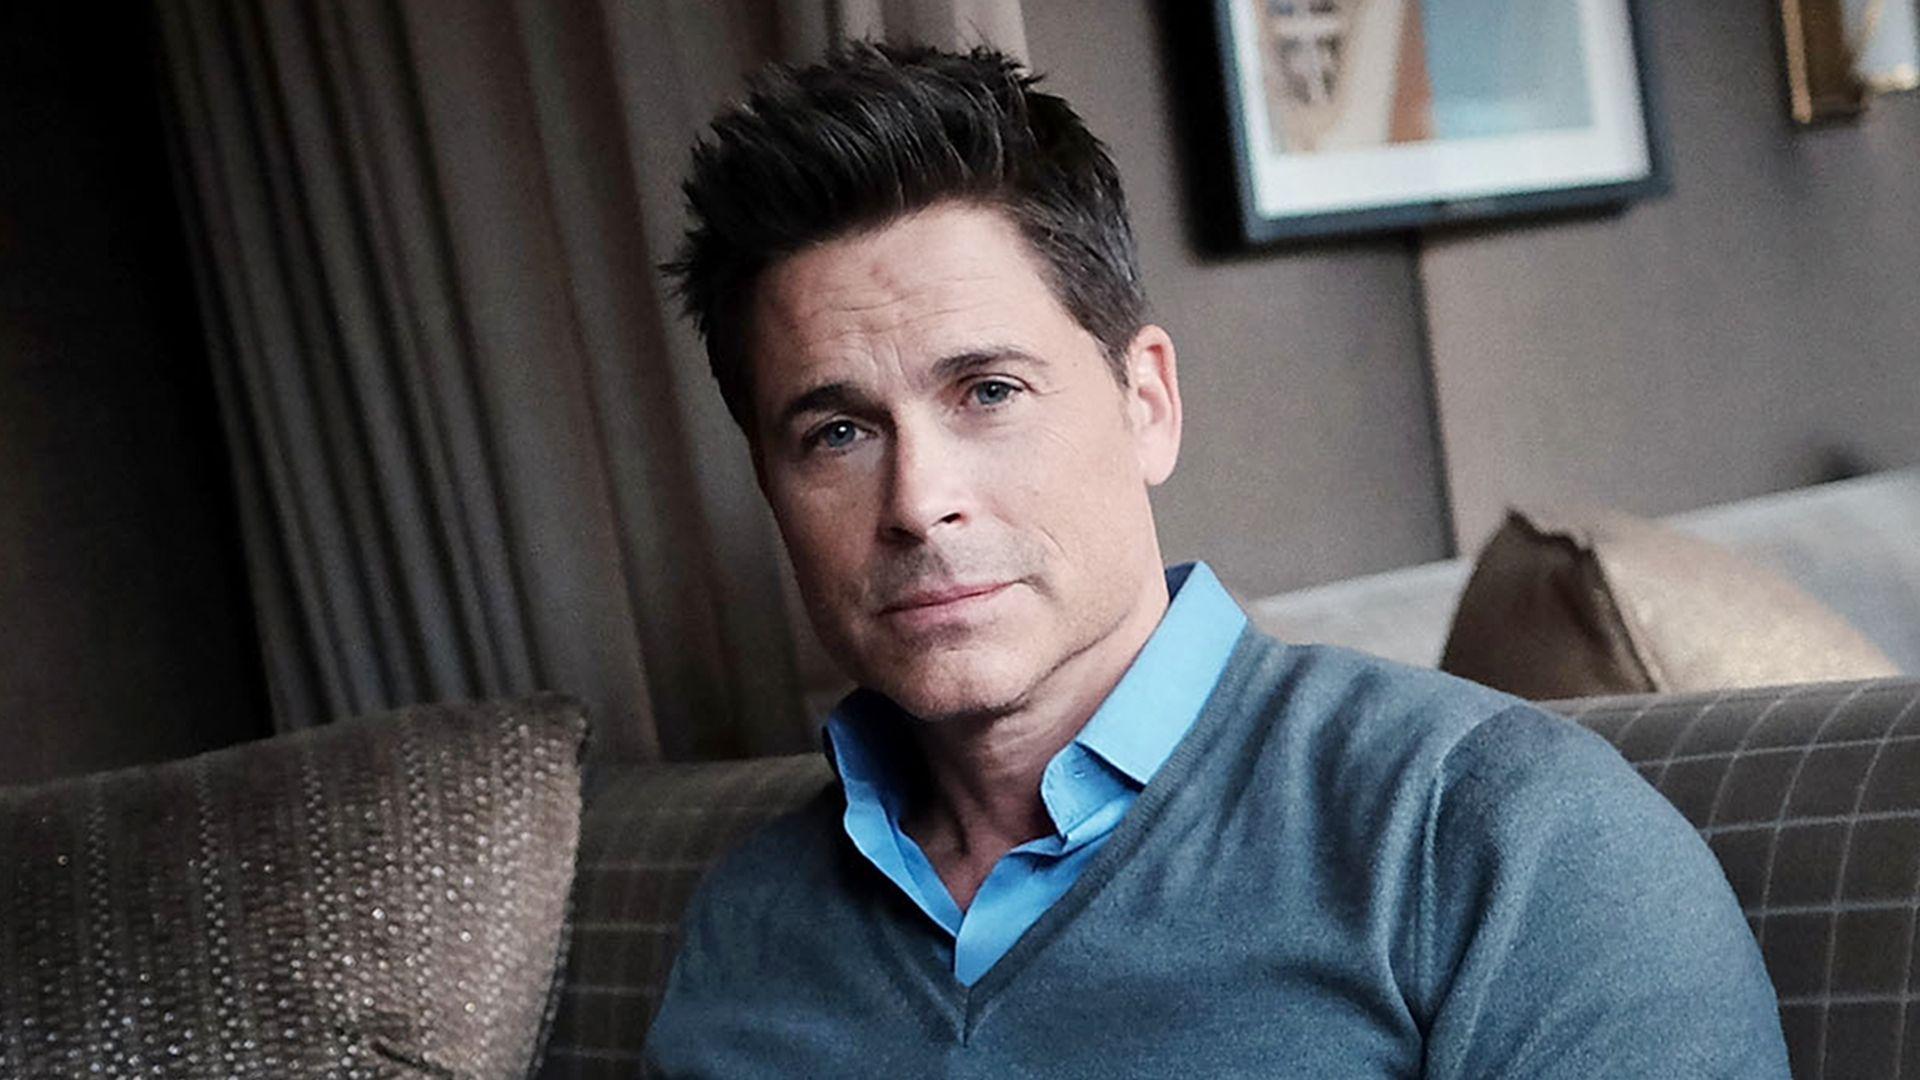 Rob Lowe is Kentucky Fried Chicken's newest Colonel Sanders